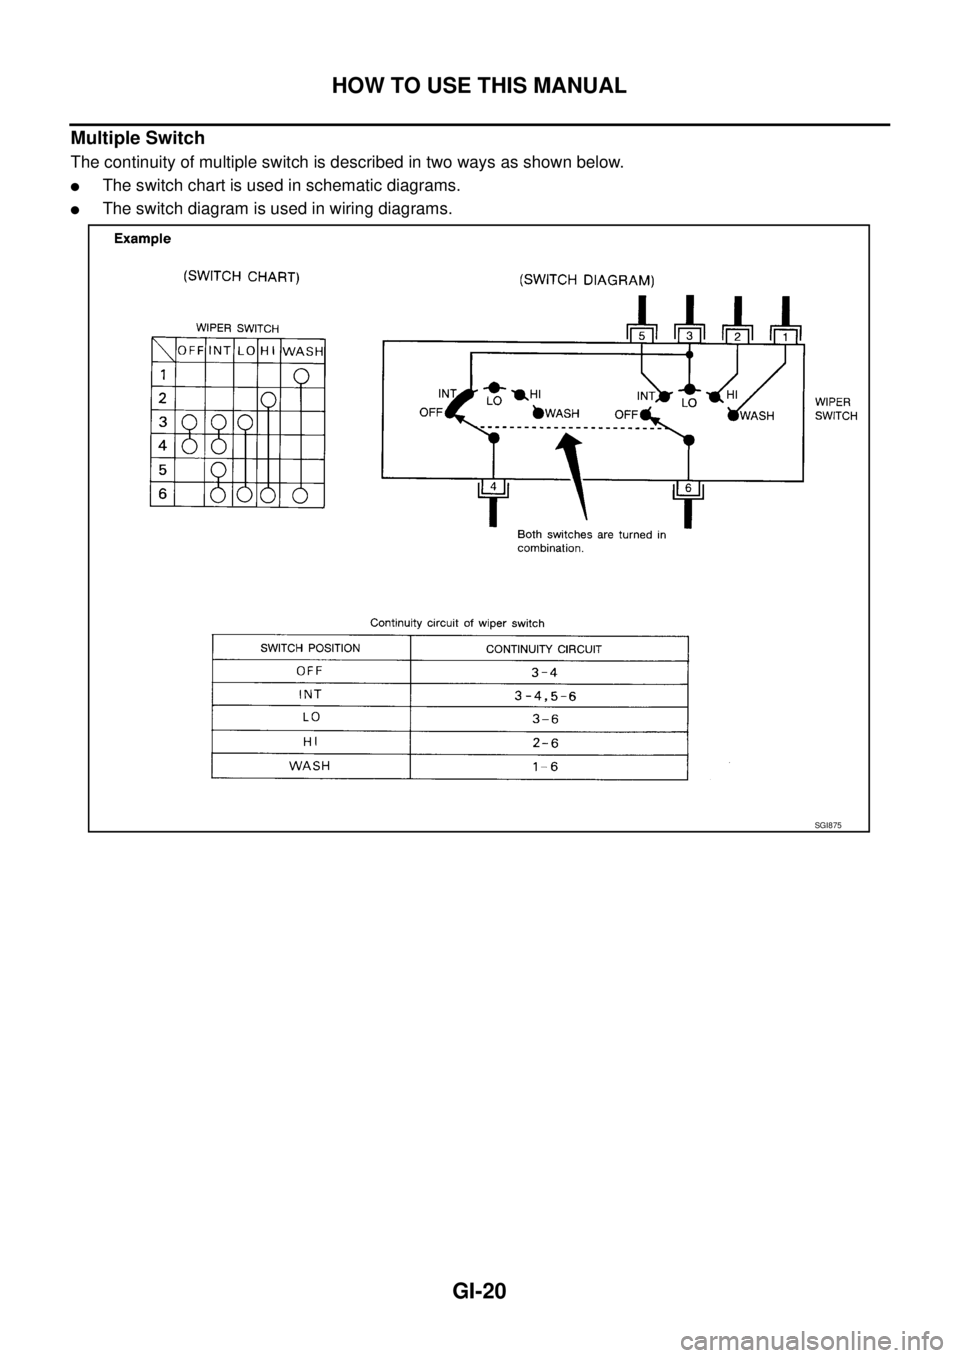 NISSAN X-TRAIL 2003  Service Repair Manual GI-20
HOW TO USE THIS MANUAL
 
Multiple Switch 
The continuity of multiple switch is described in two ways as shown below.
The switch chart is used in schematic diagrams.
The switch diagram is used 